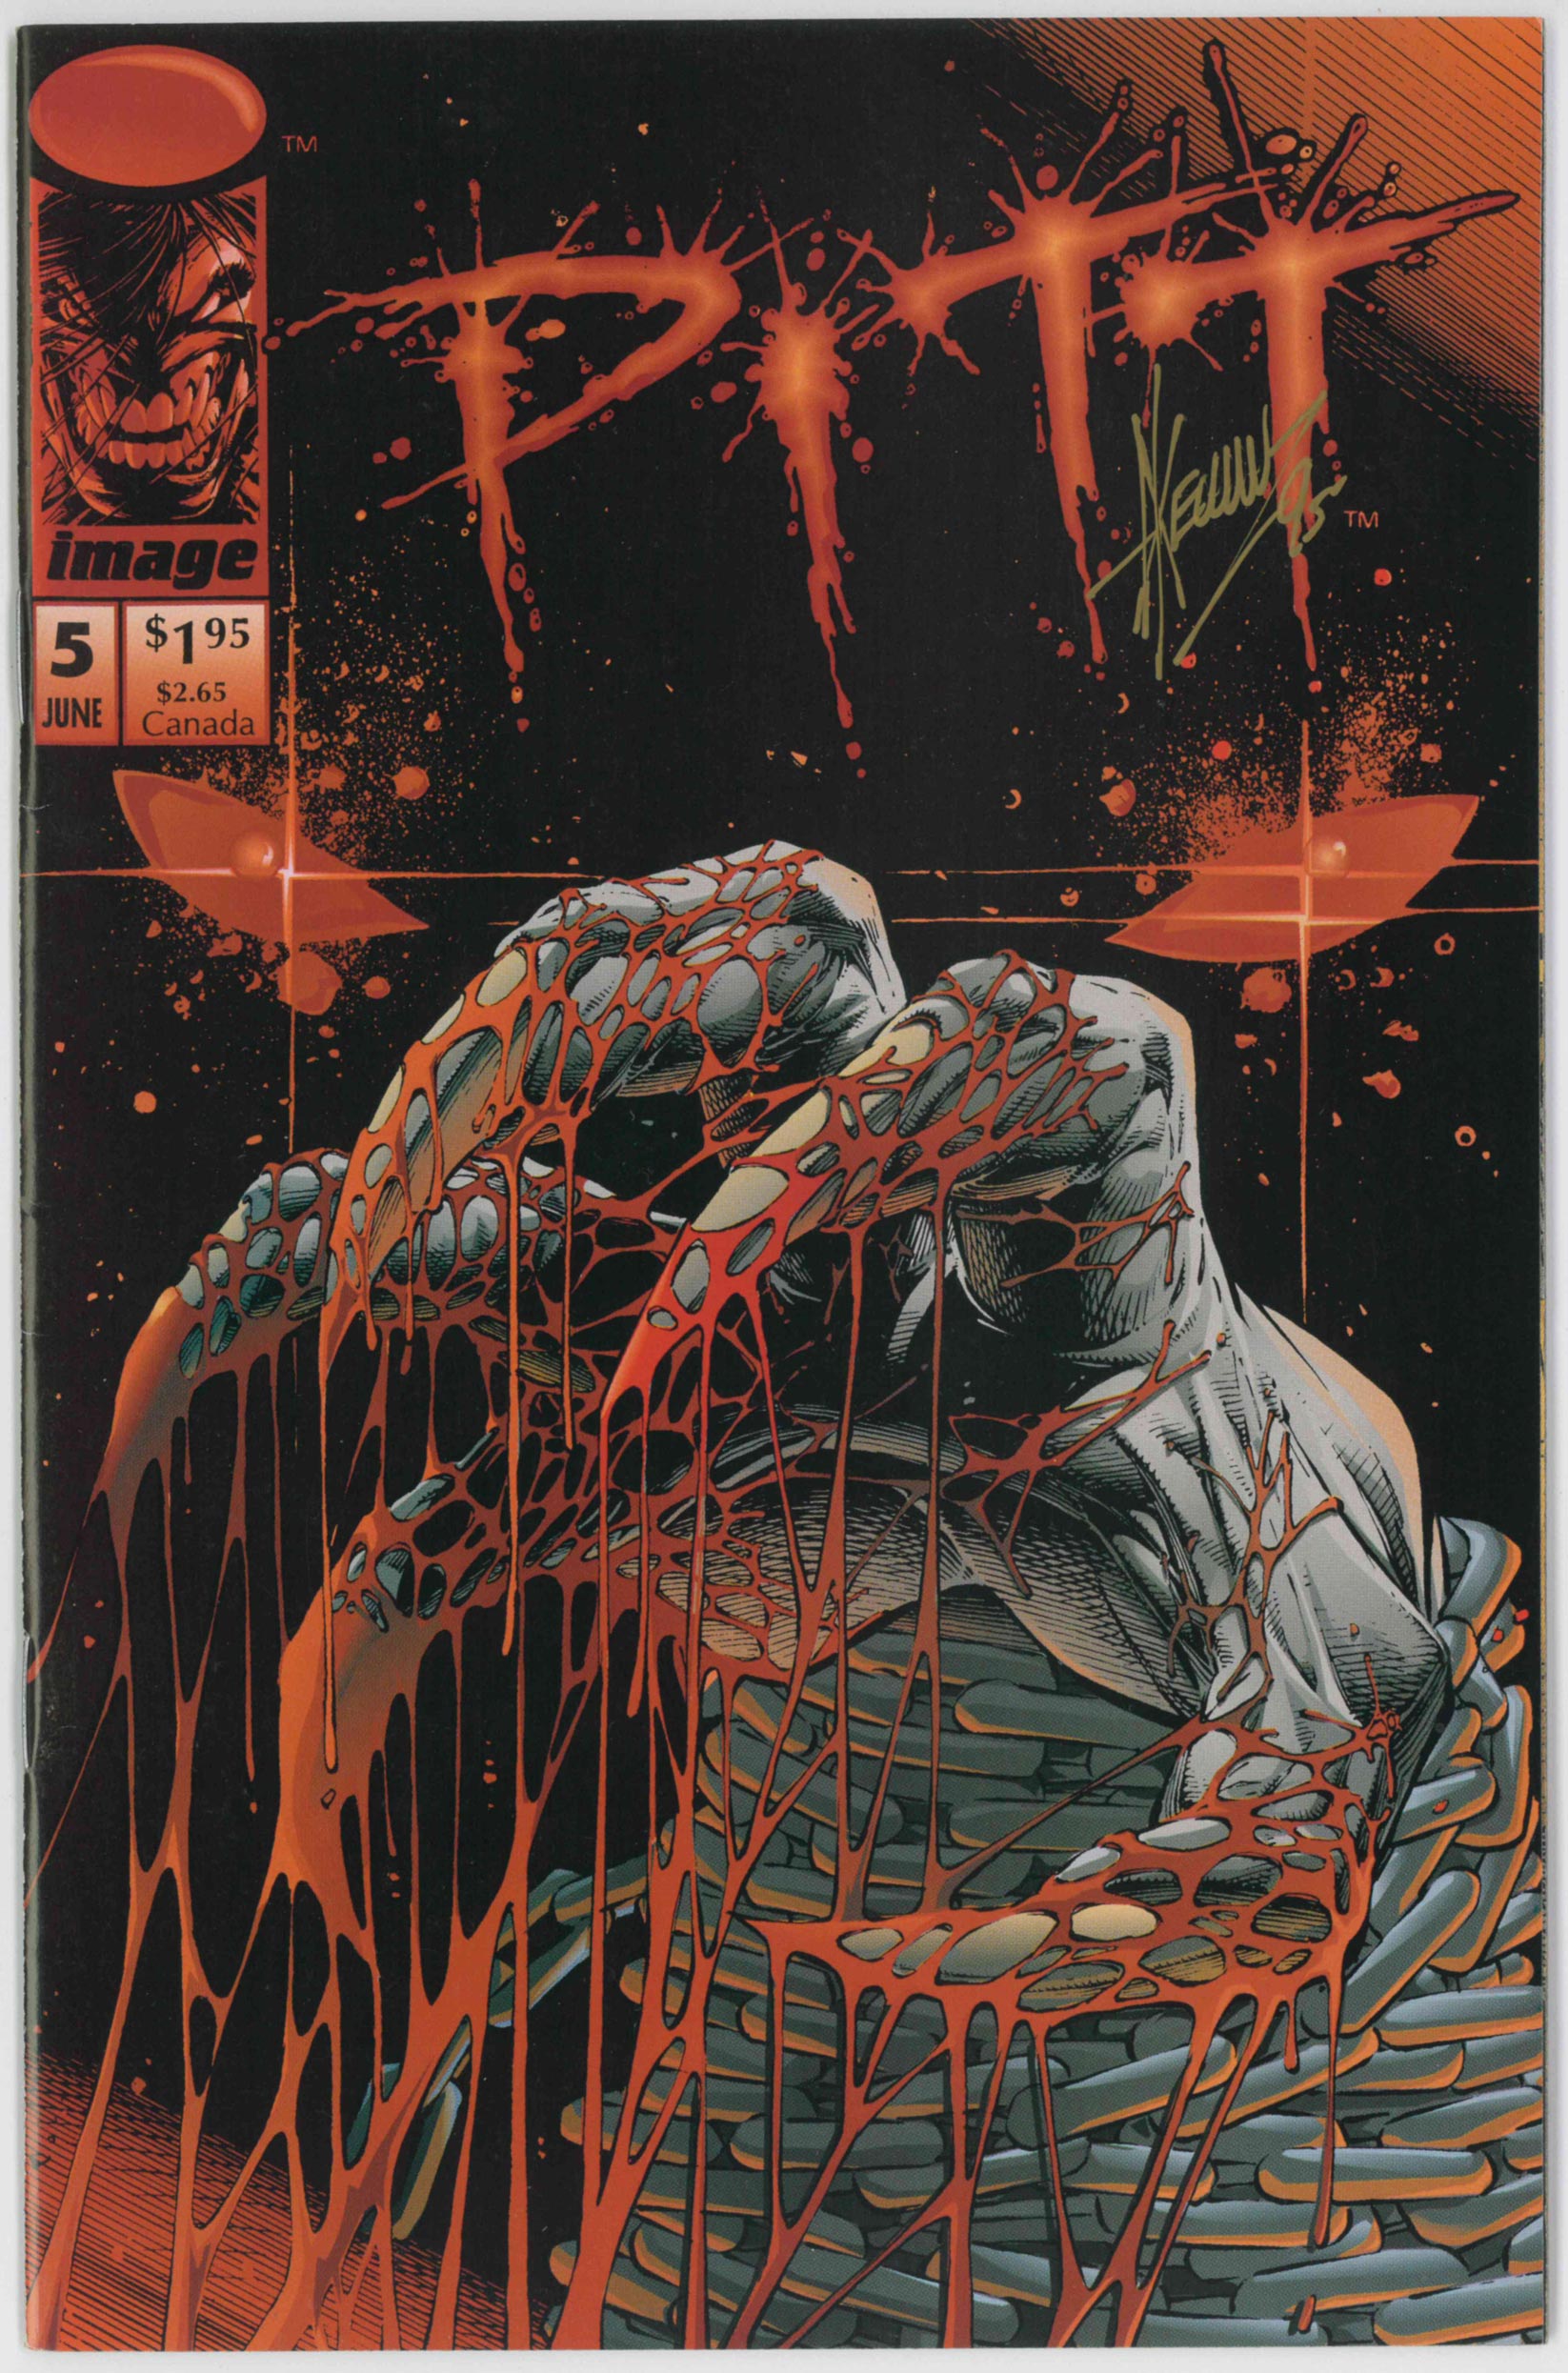 PITT (1993) #5 - SIGNED BY DALE KEOWN